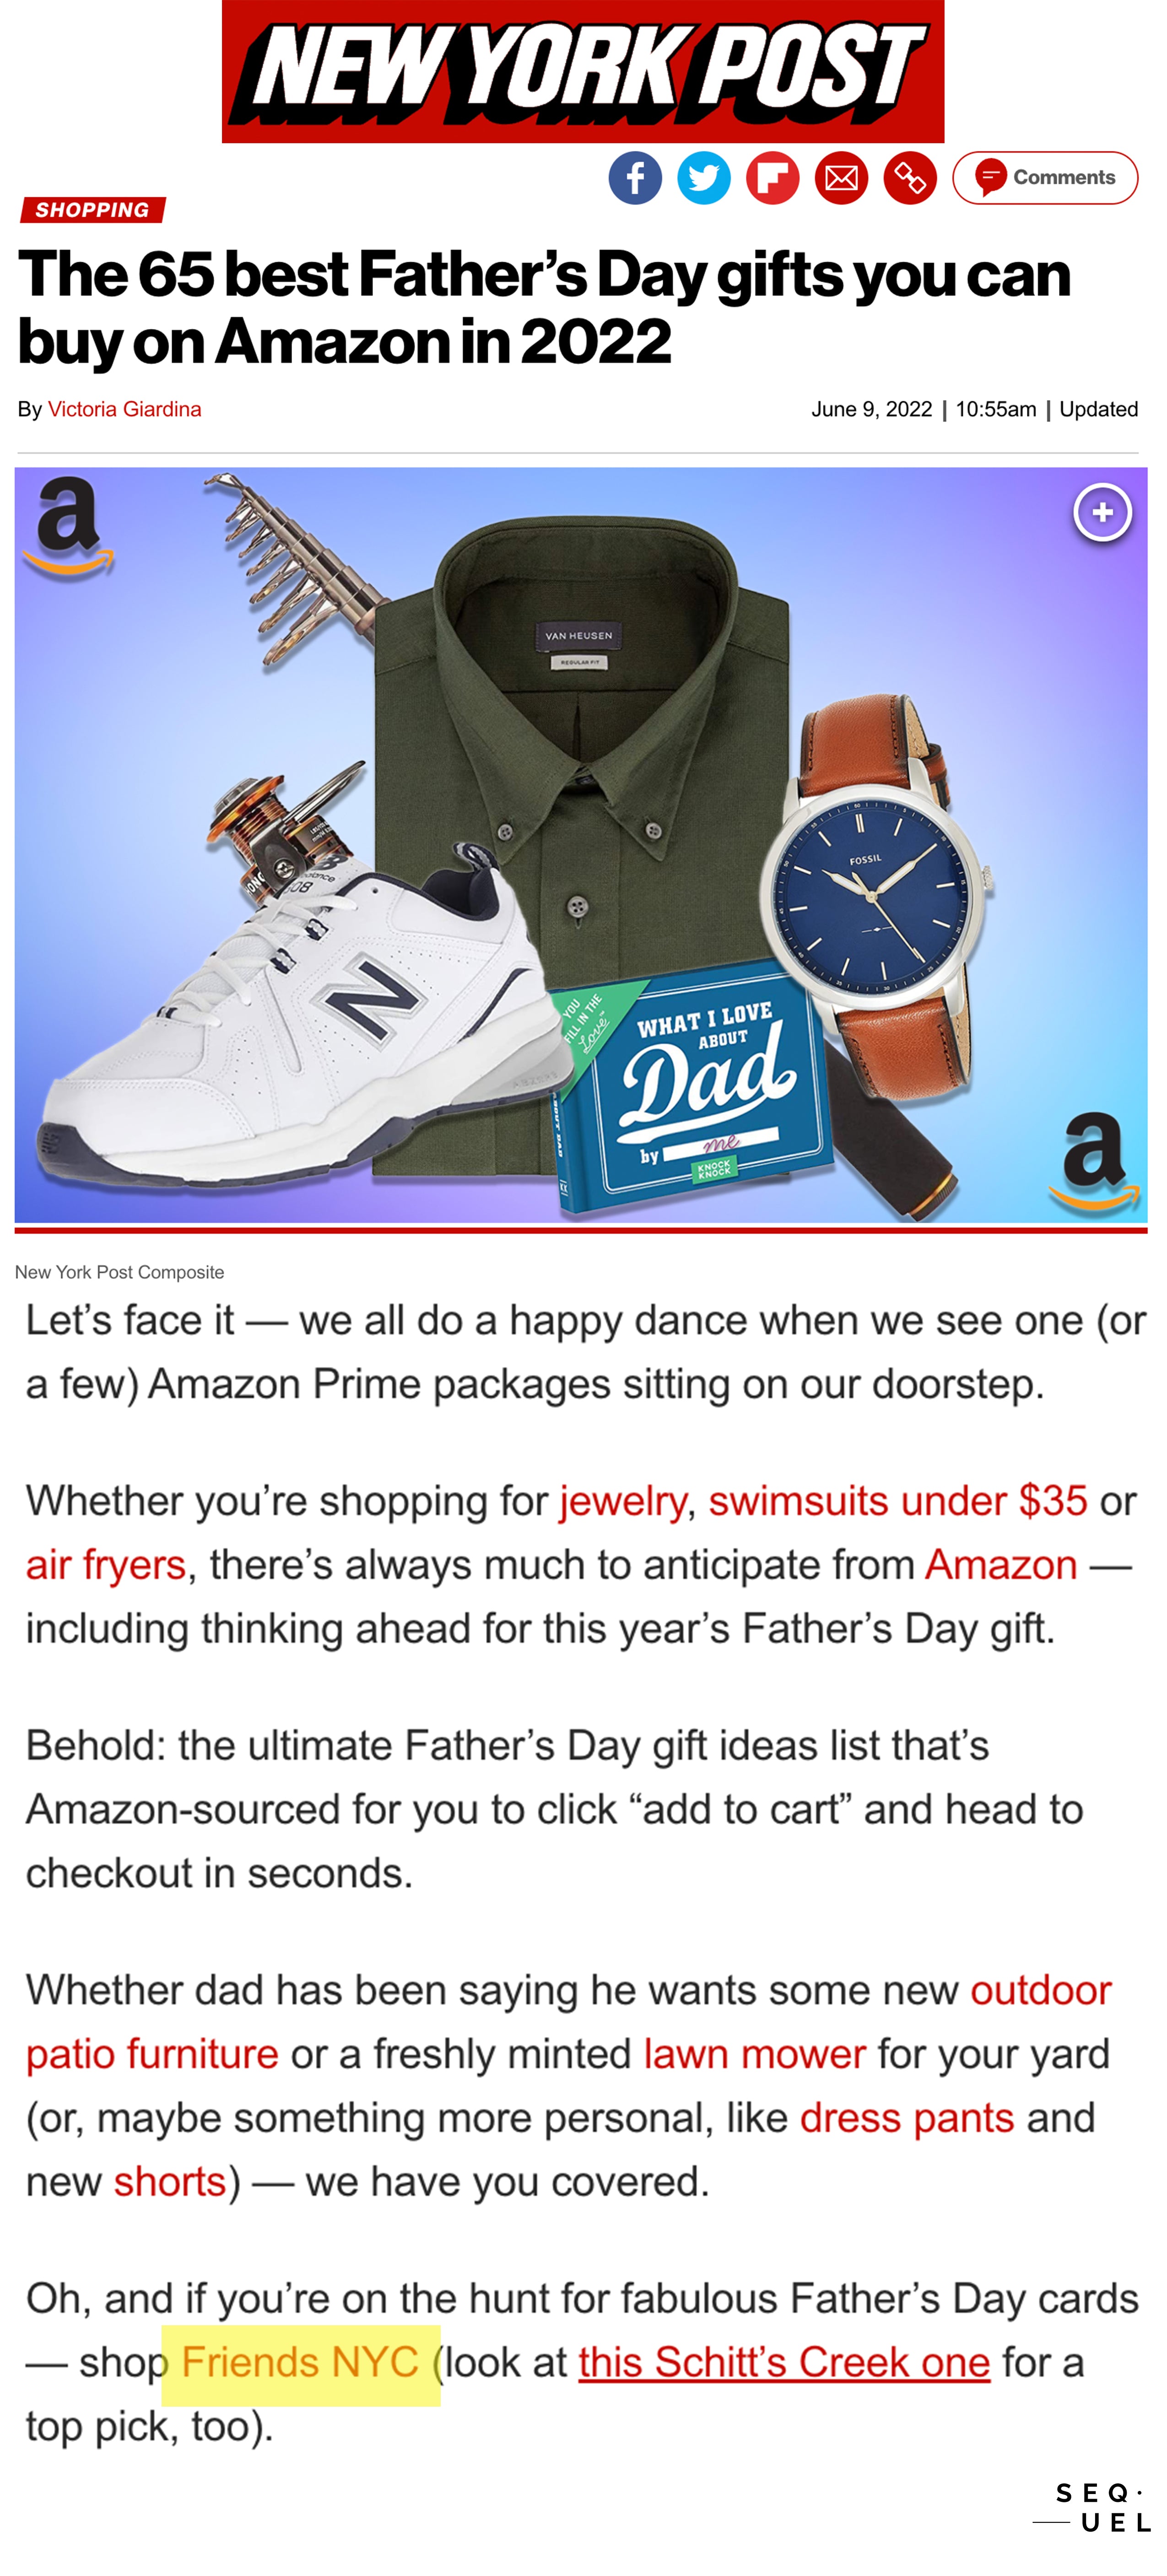 "The 65 Best Father's Day gifts you can buy on Amazon in 2022"